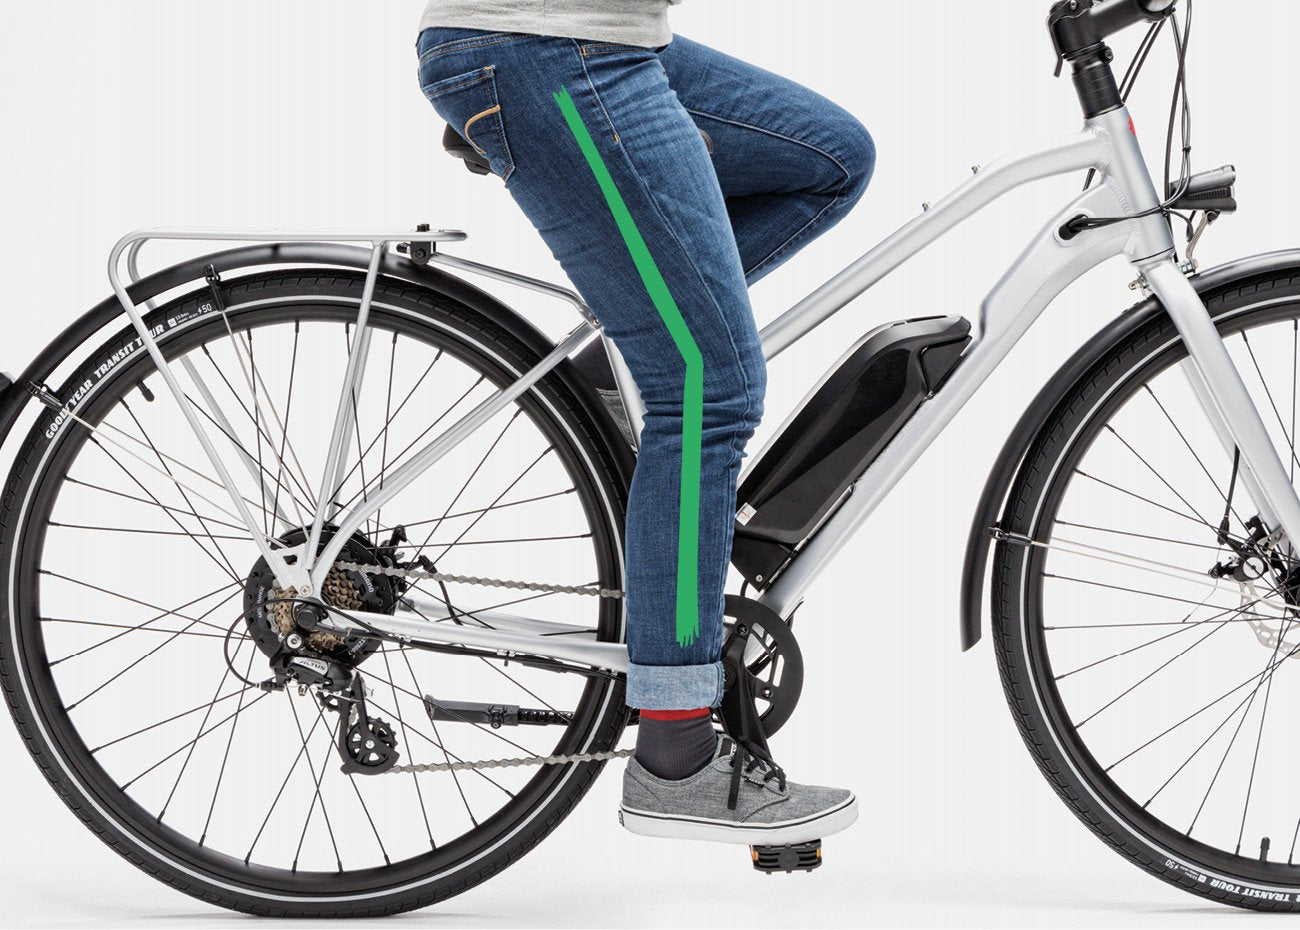 How to properly size yourself on an electric bike